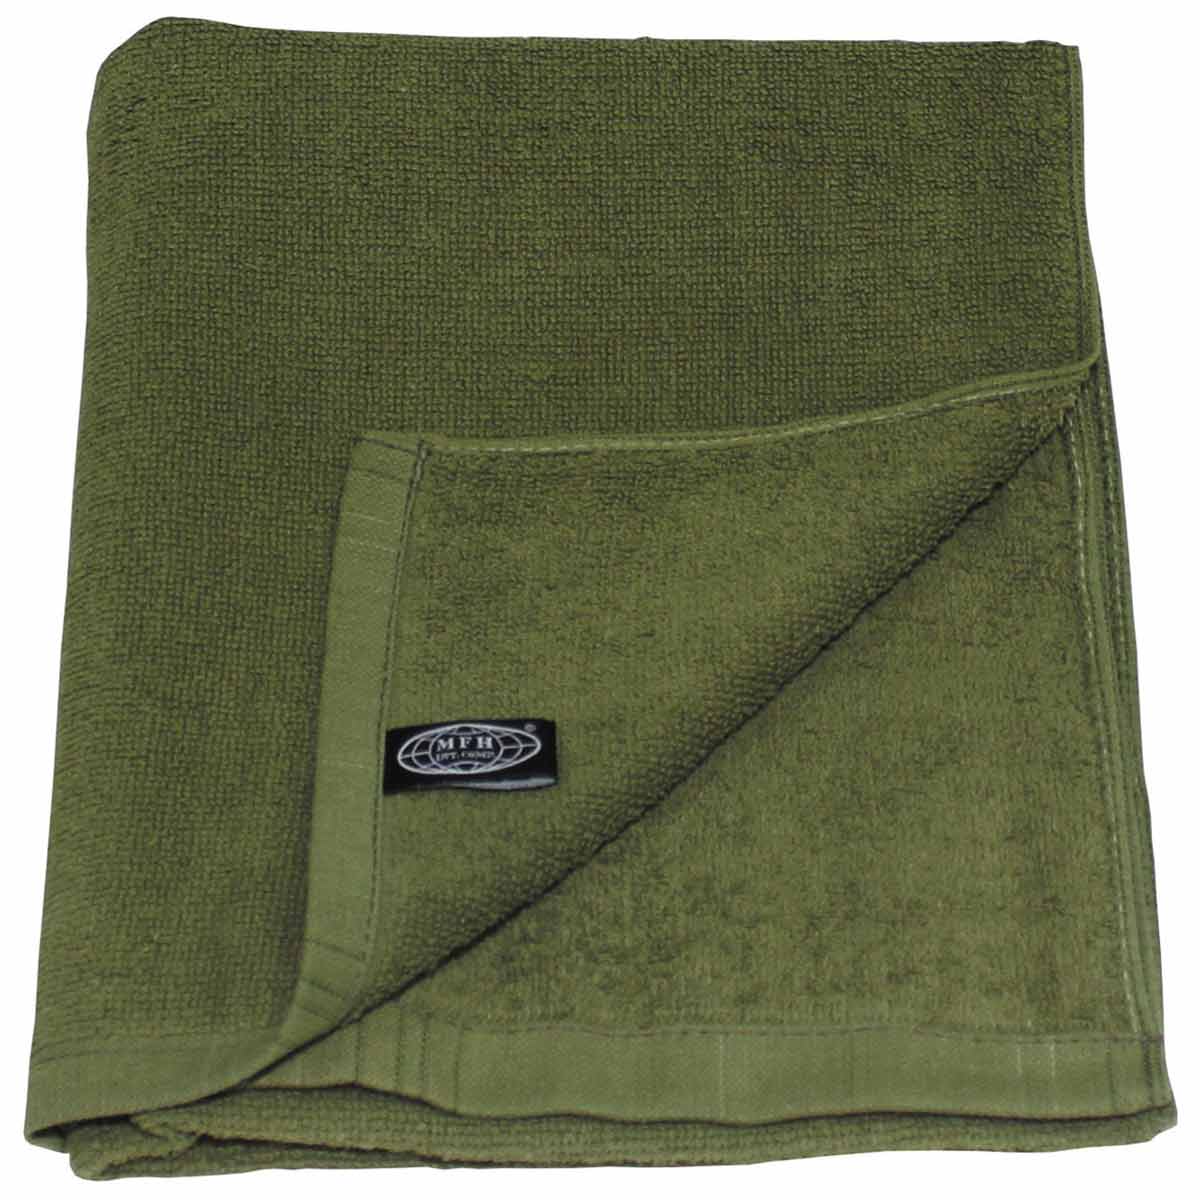 Highlander Microfibre Towel Olive Green campin Army Exercise Olive Green X-Large 